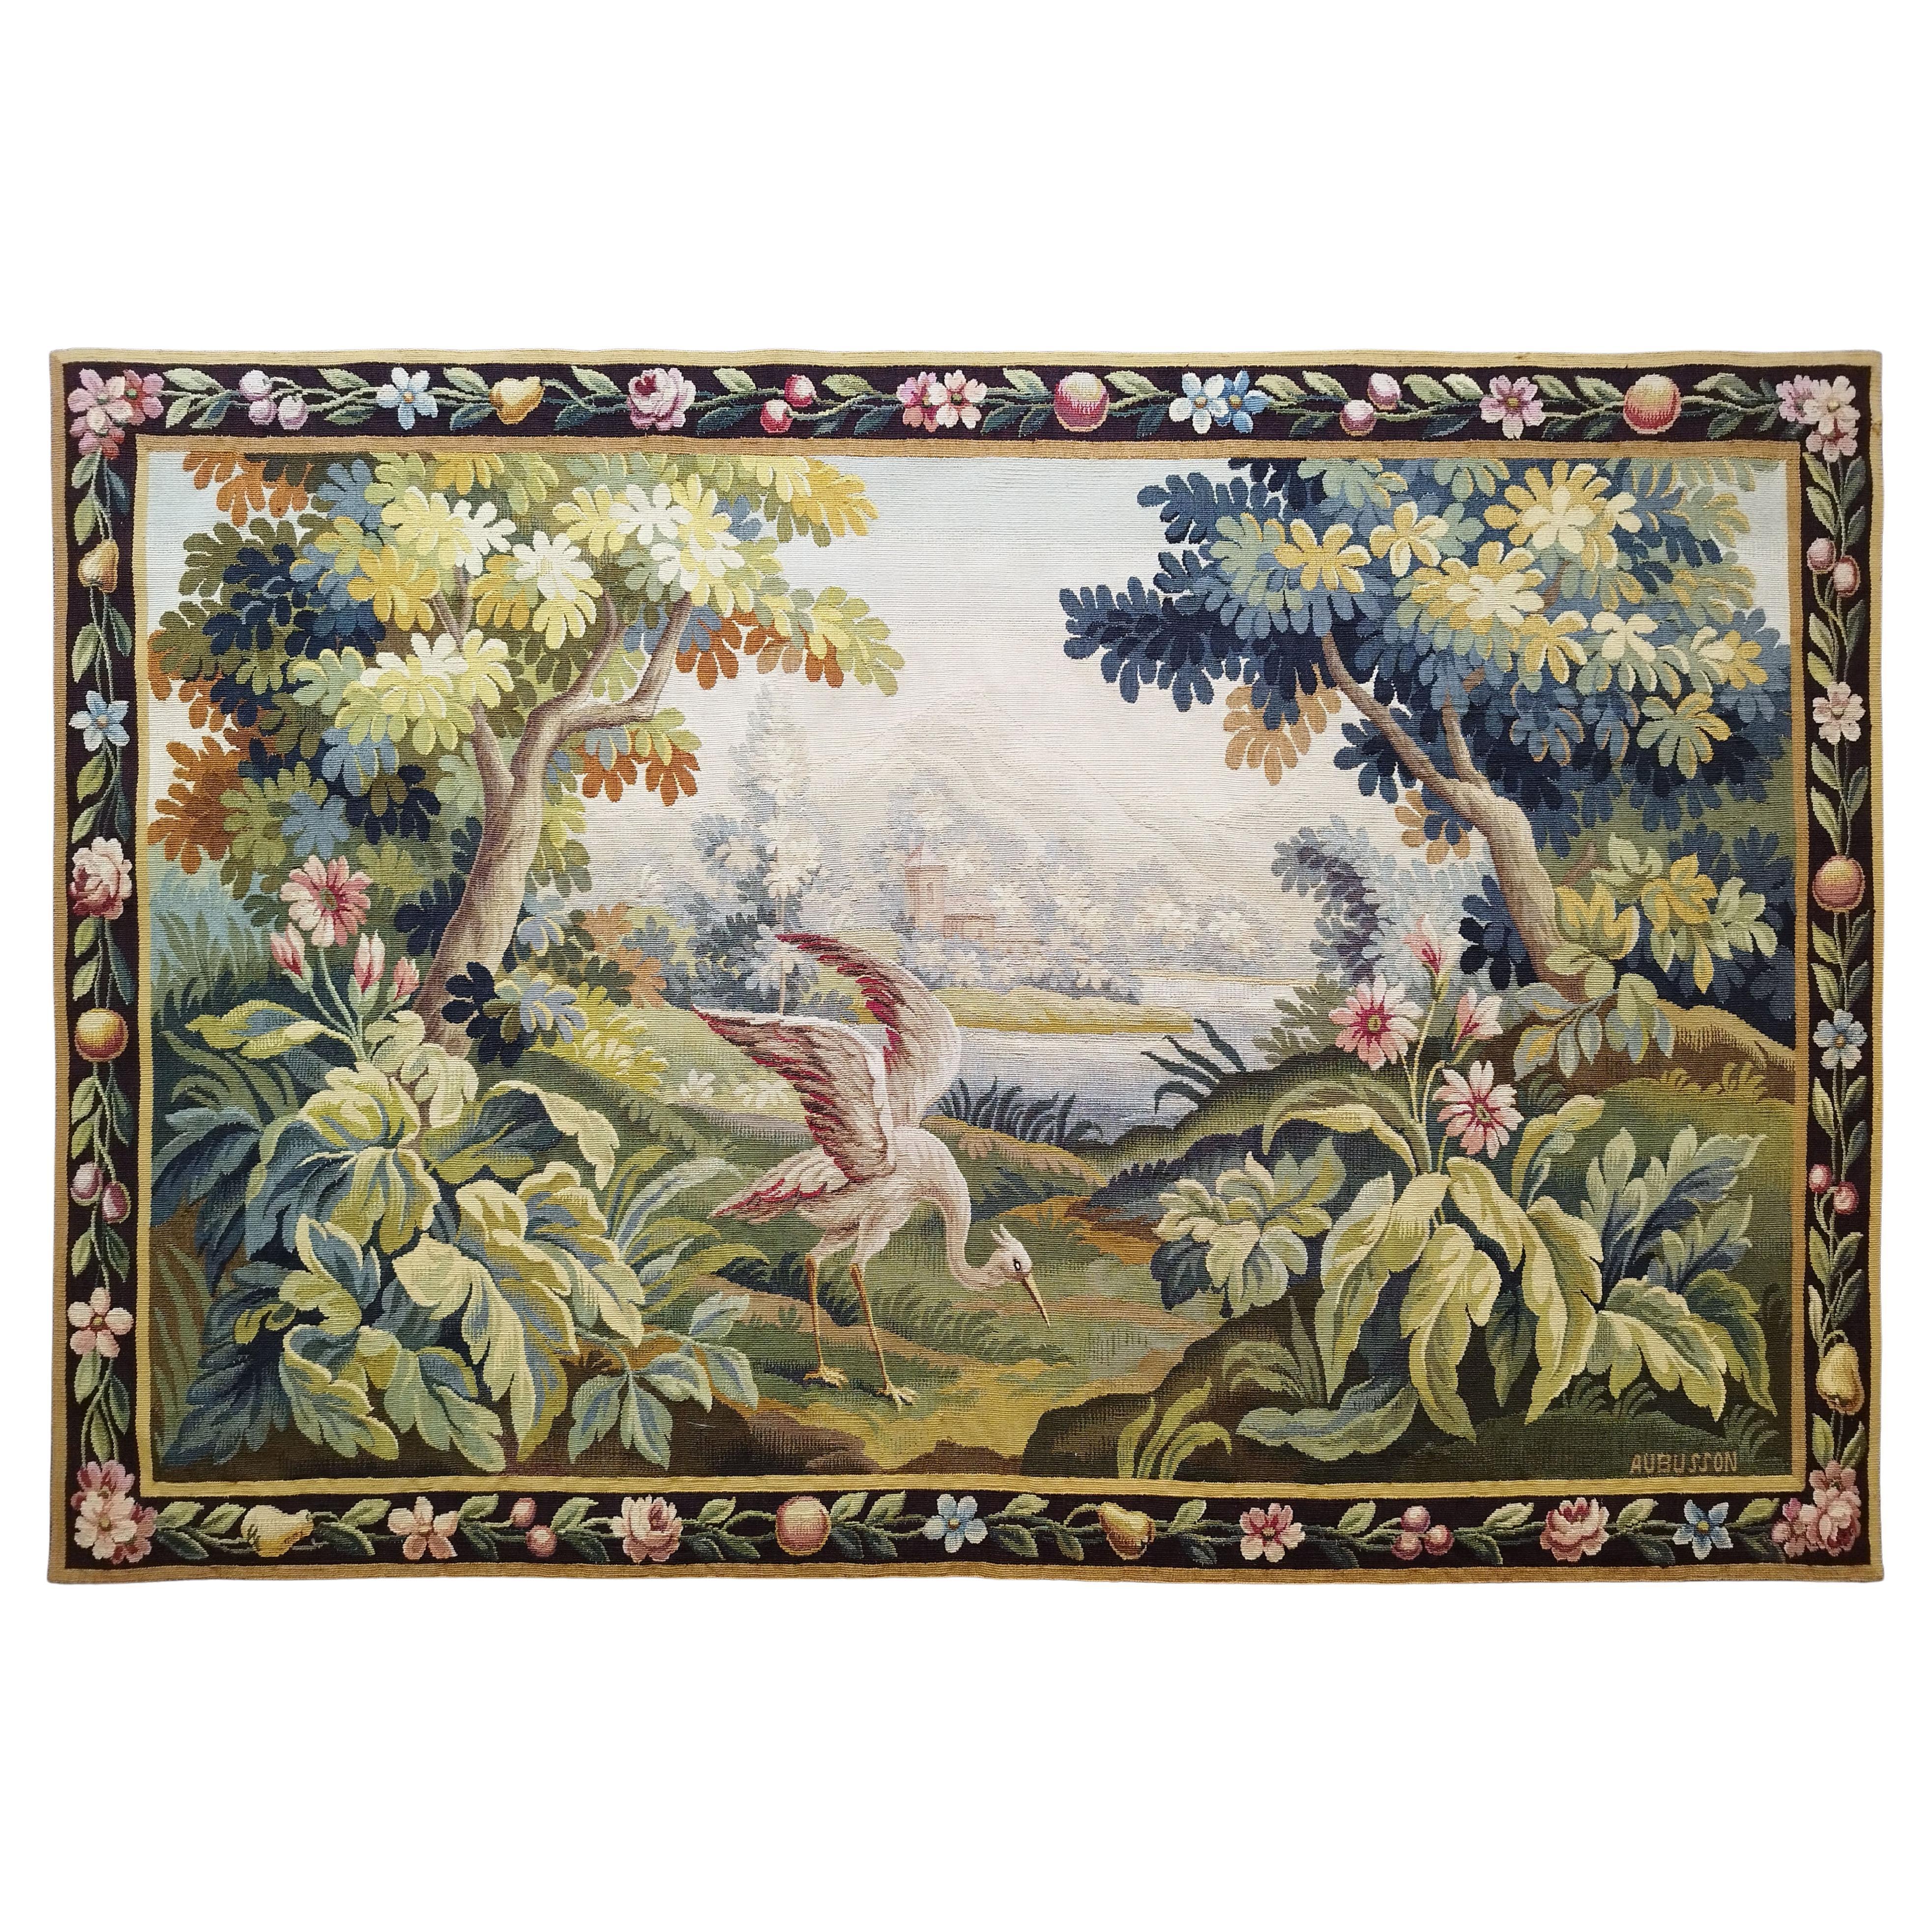 Aubusson Tapestry of 19th Century Aubusson, N° 1236